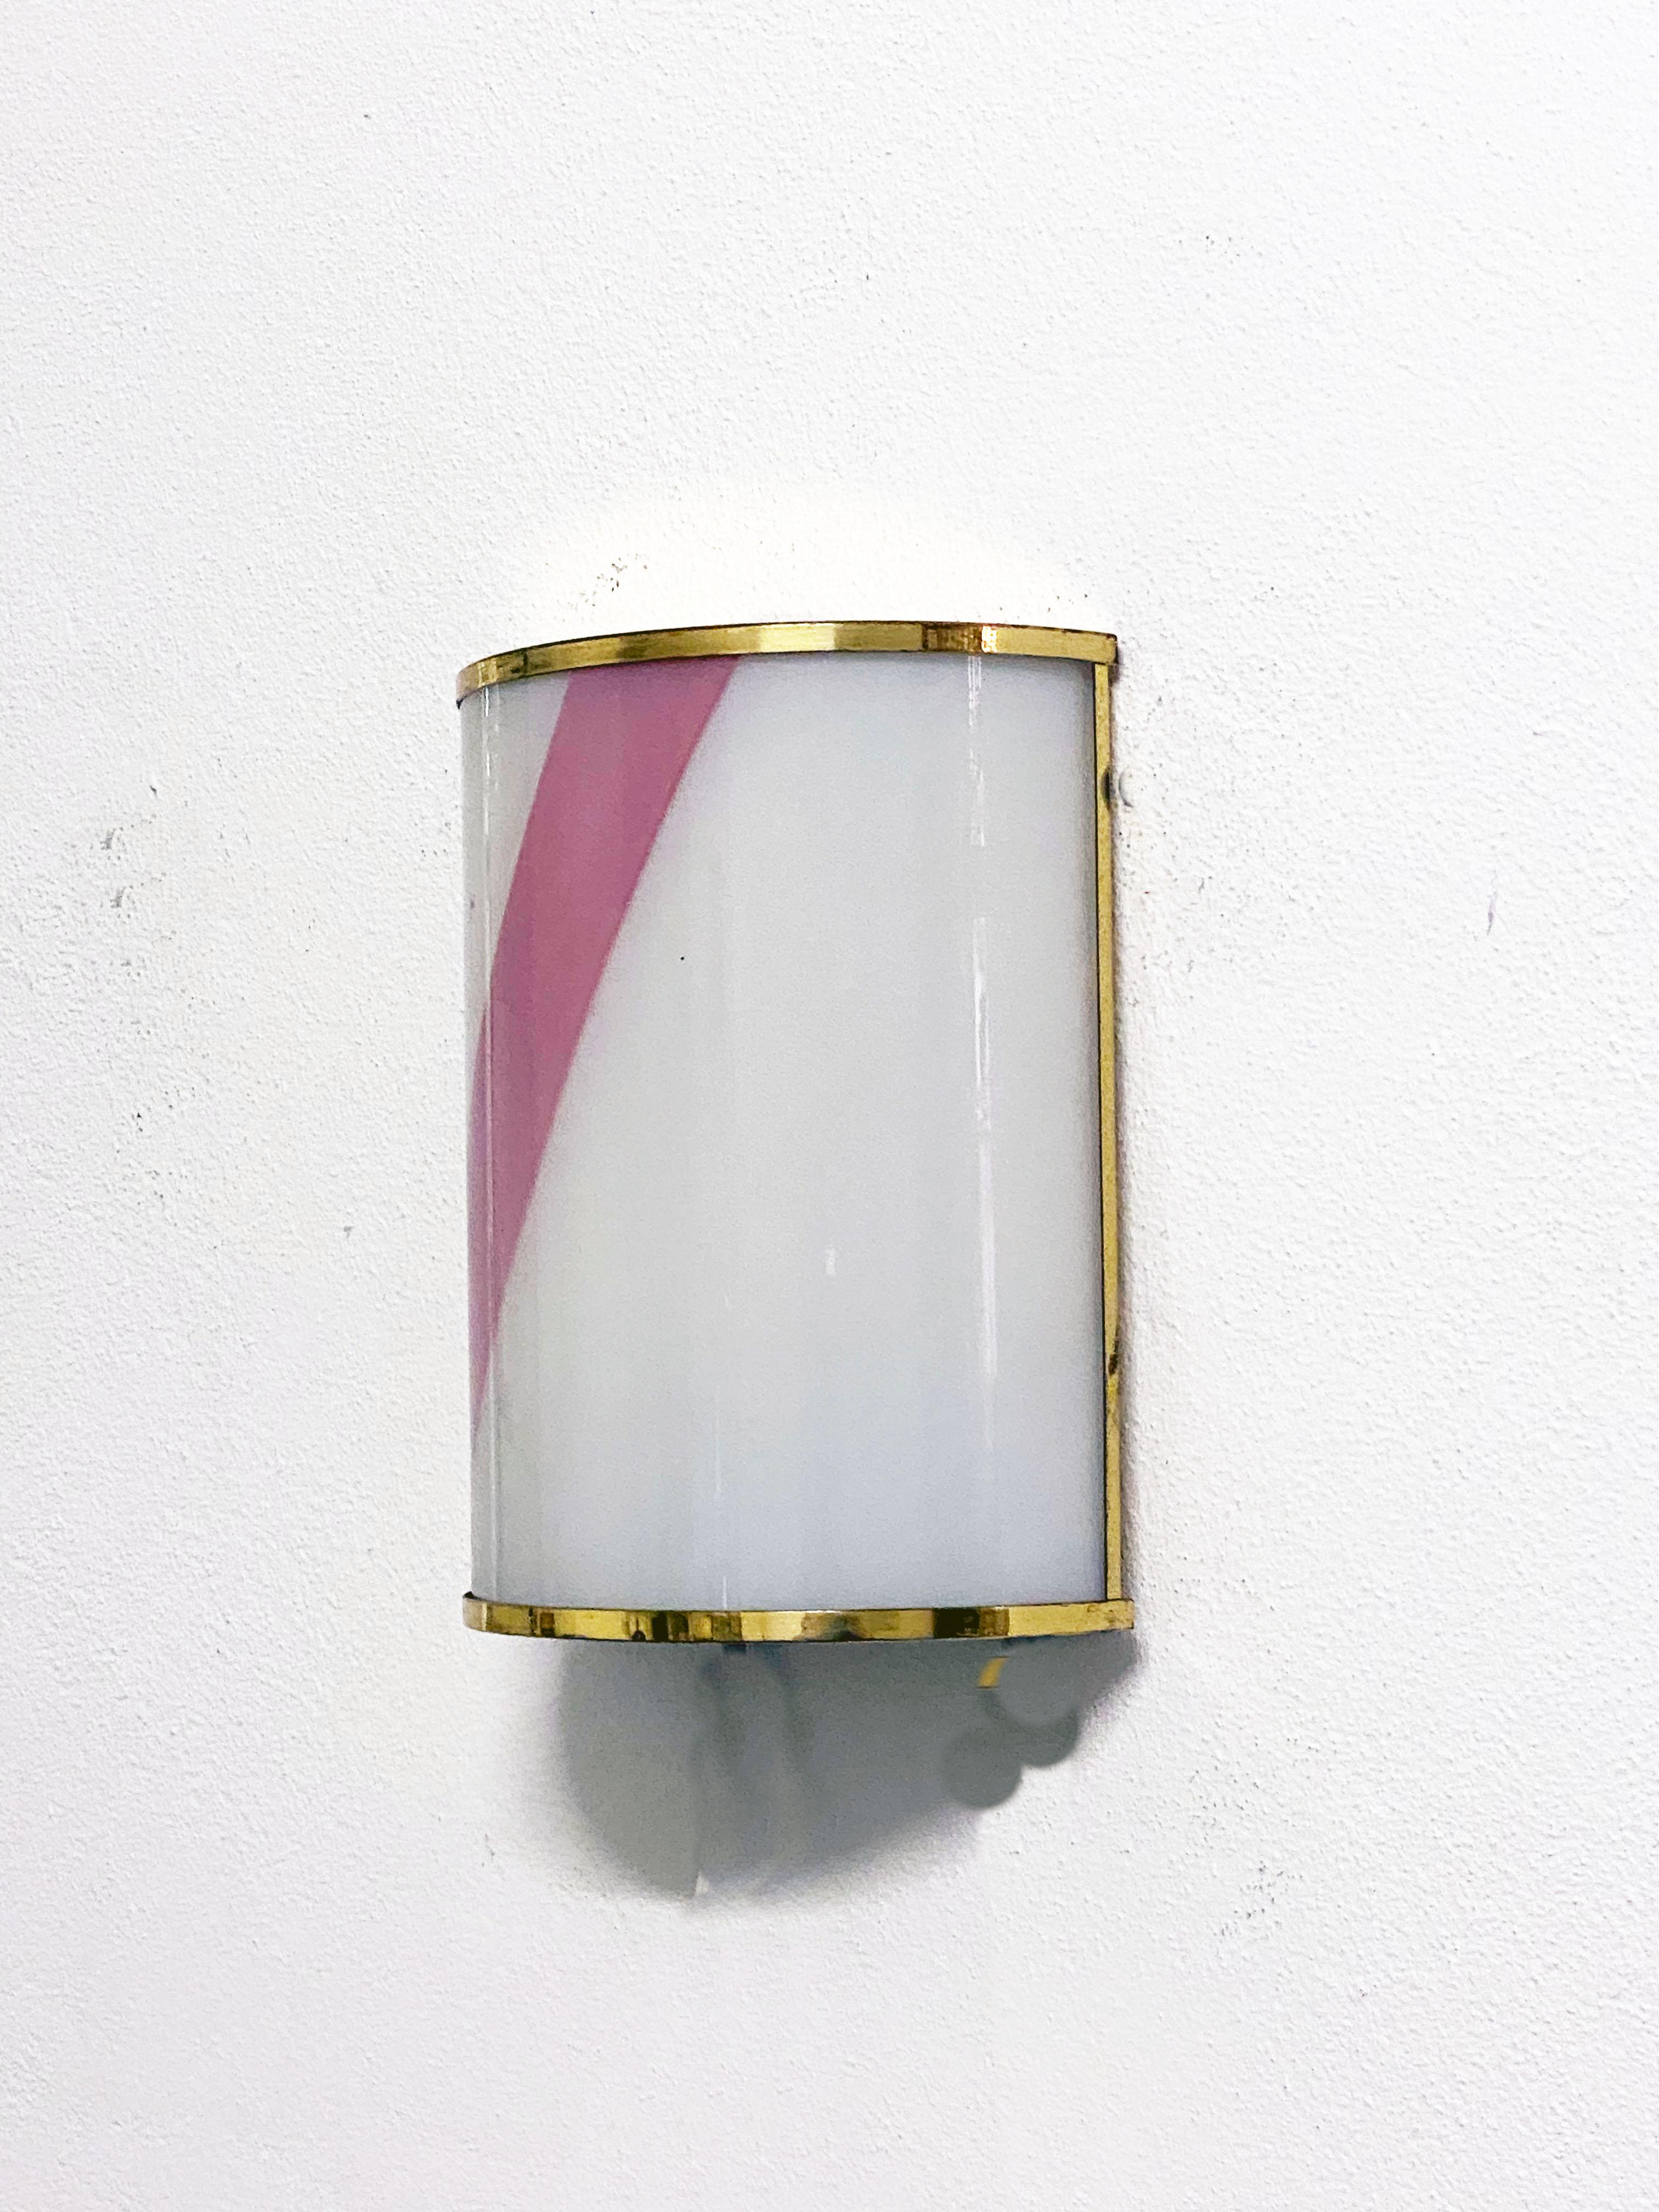 Brass frame with and white/pink colored glass, fitted each with one E27 bulb.
Made in Italy in the 1970s
Fully working and in very good vintage condition.